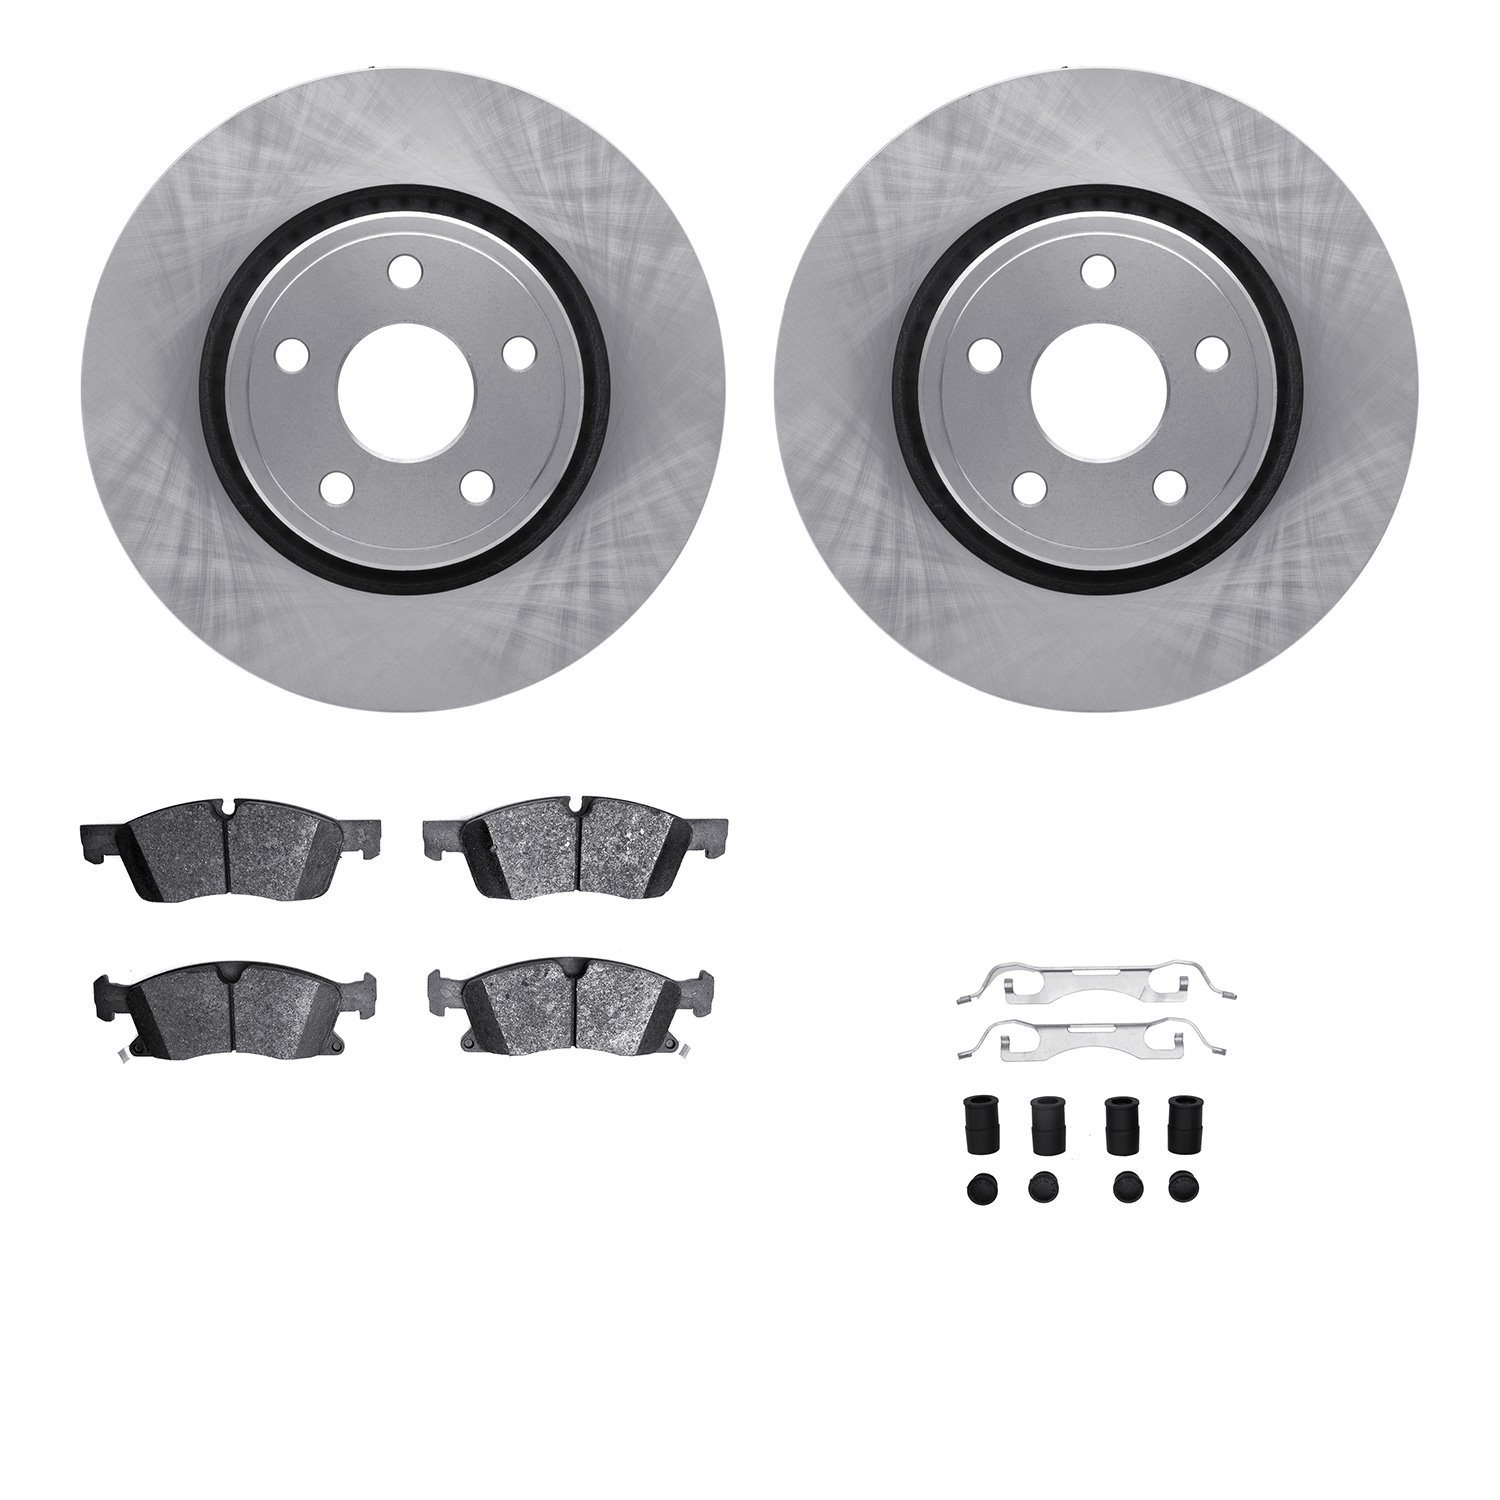 6312-42053 Brake Rotors with 3000-Series Ceramic Brake Pads Kit with Hardware, Fits Select Mopar, Position: Front